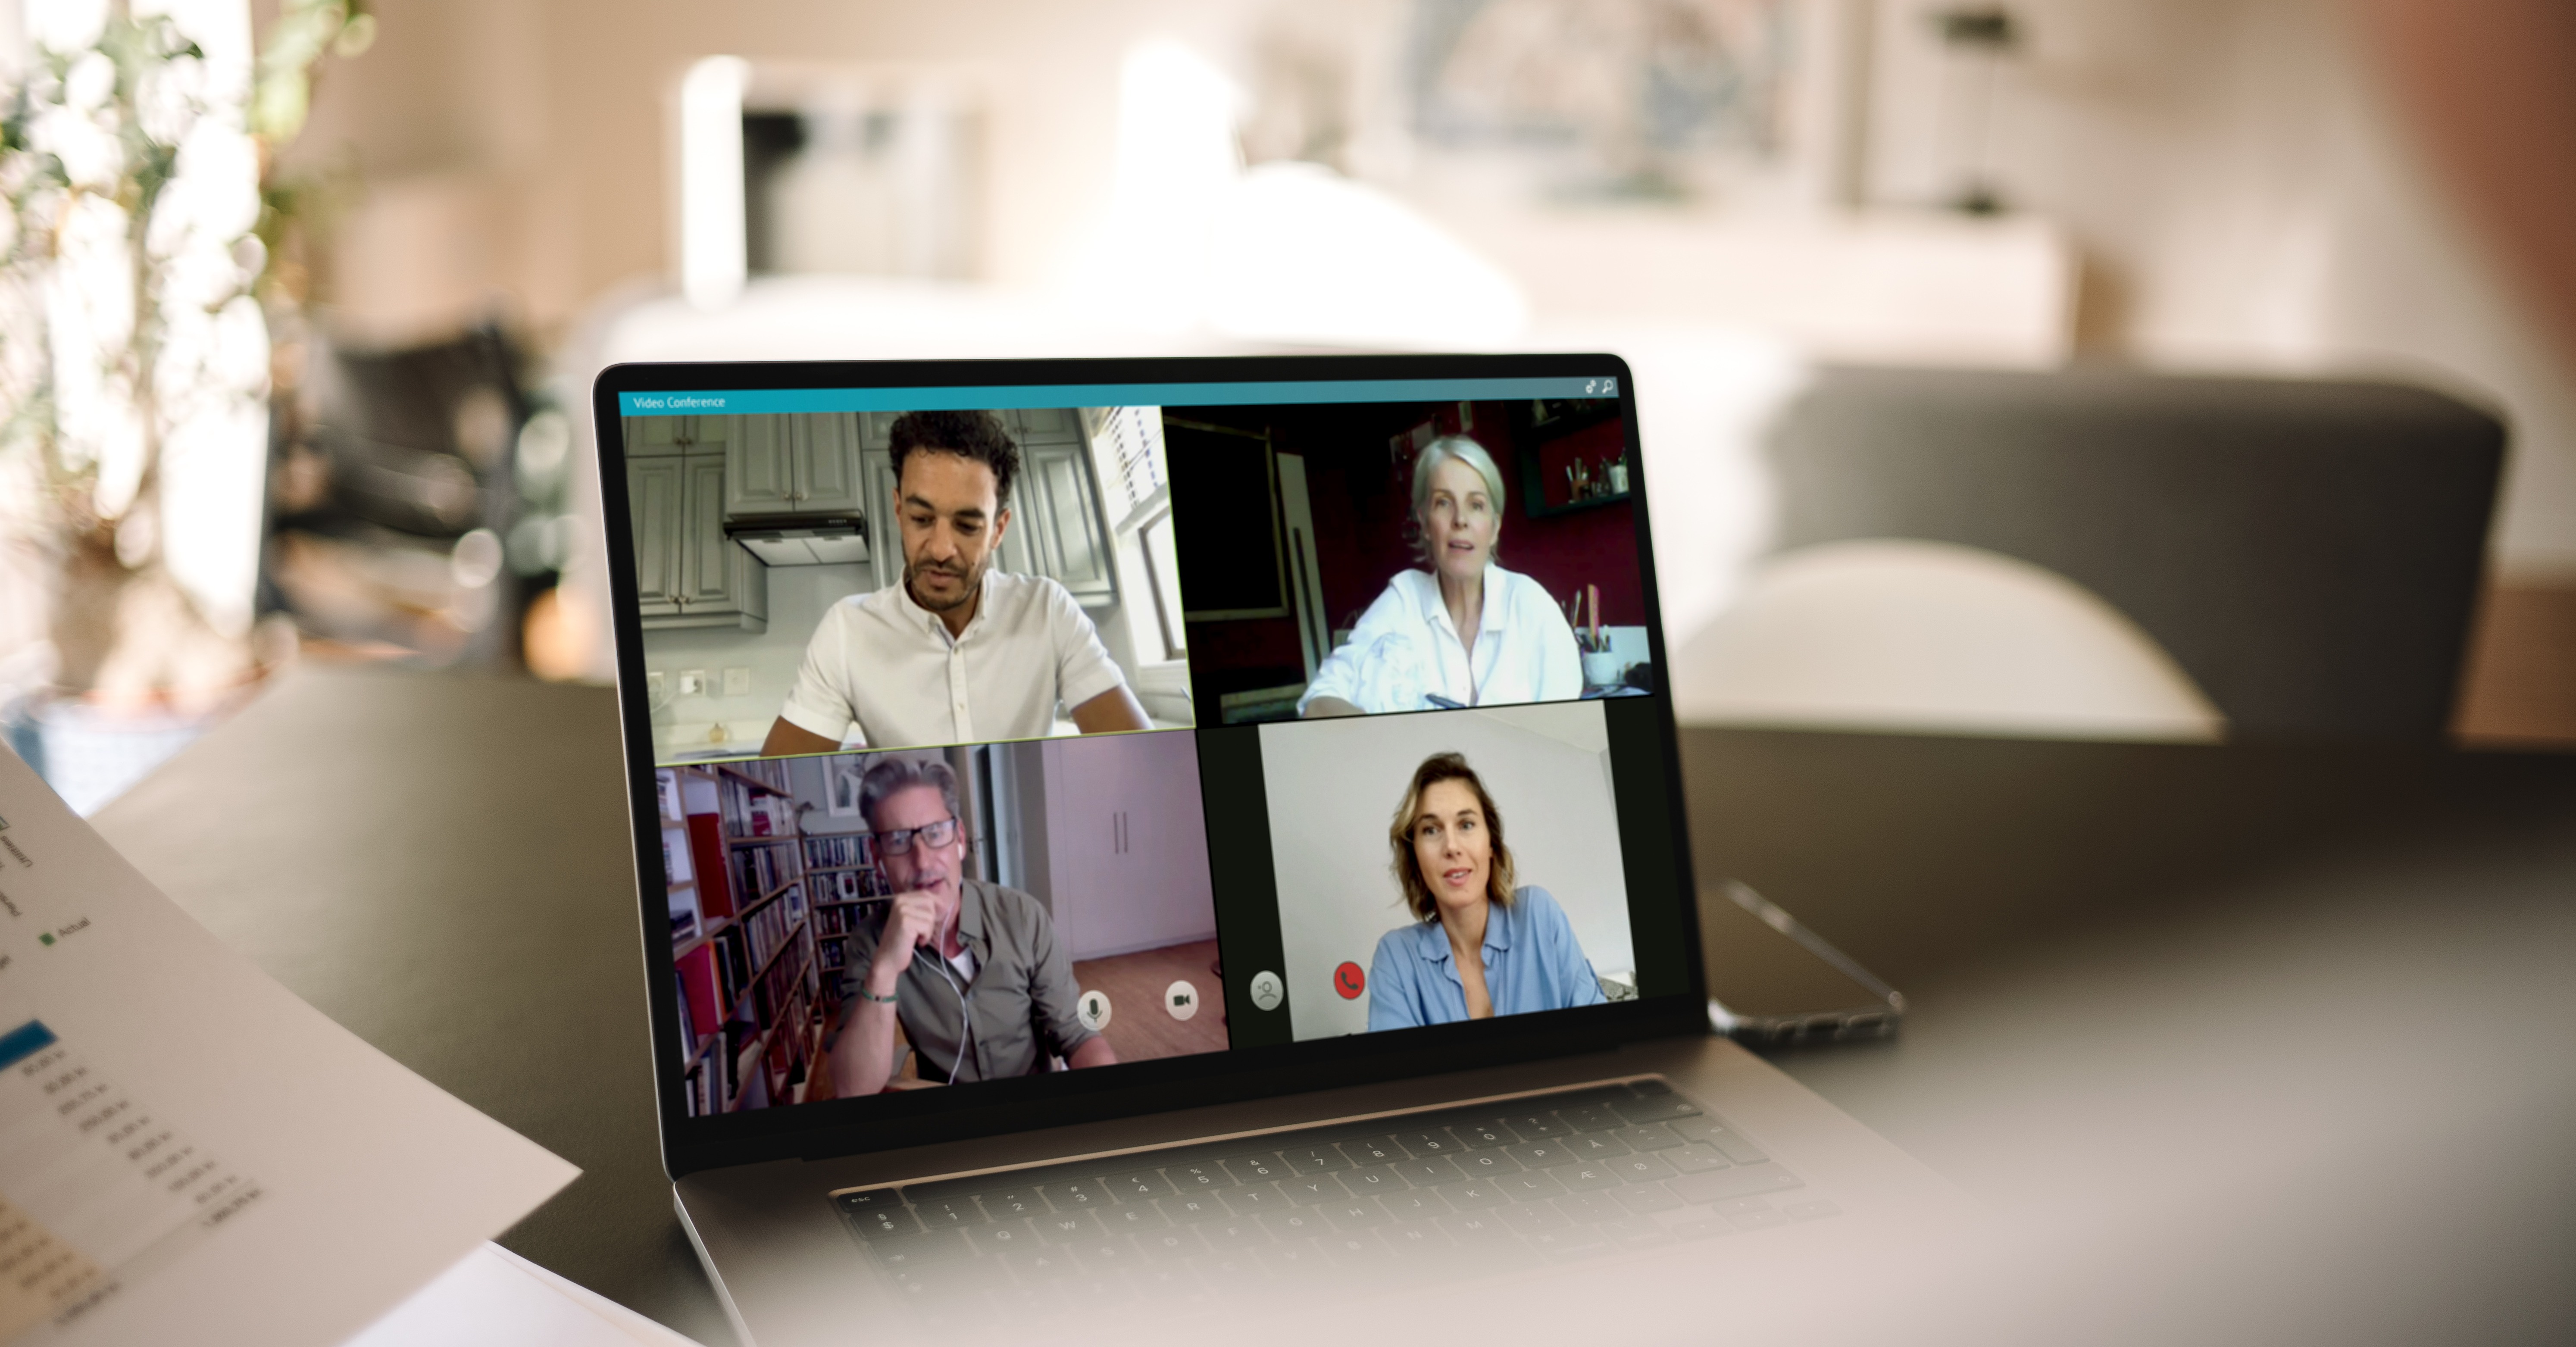 online-meeting-via-video-conference-call-G9CNFTZ